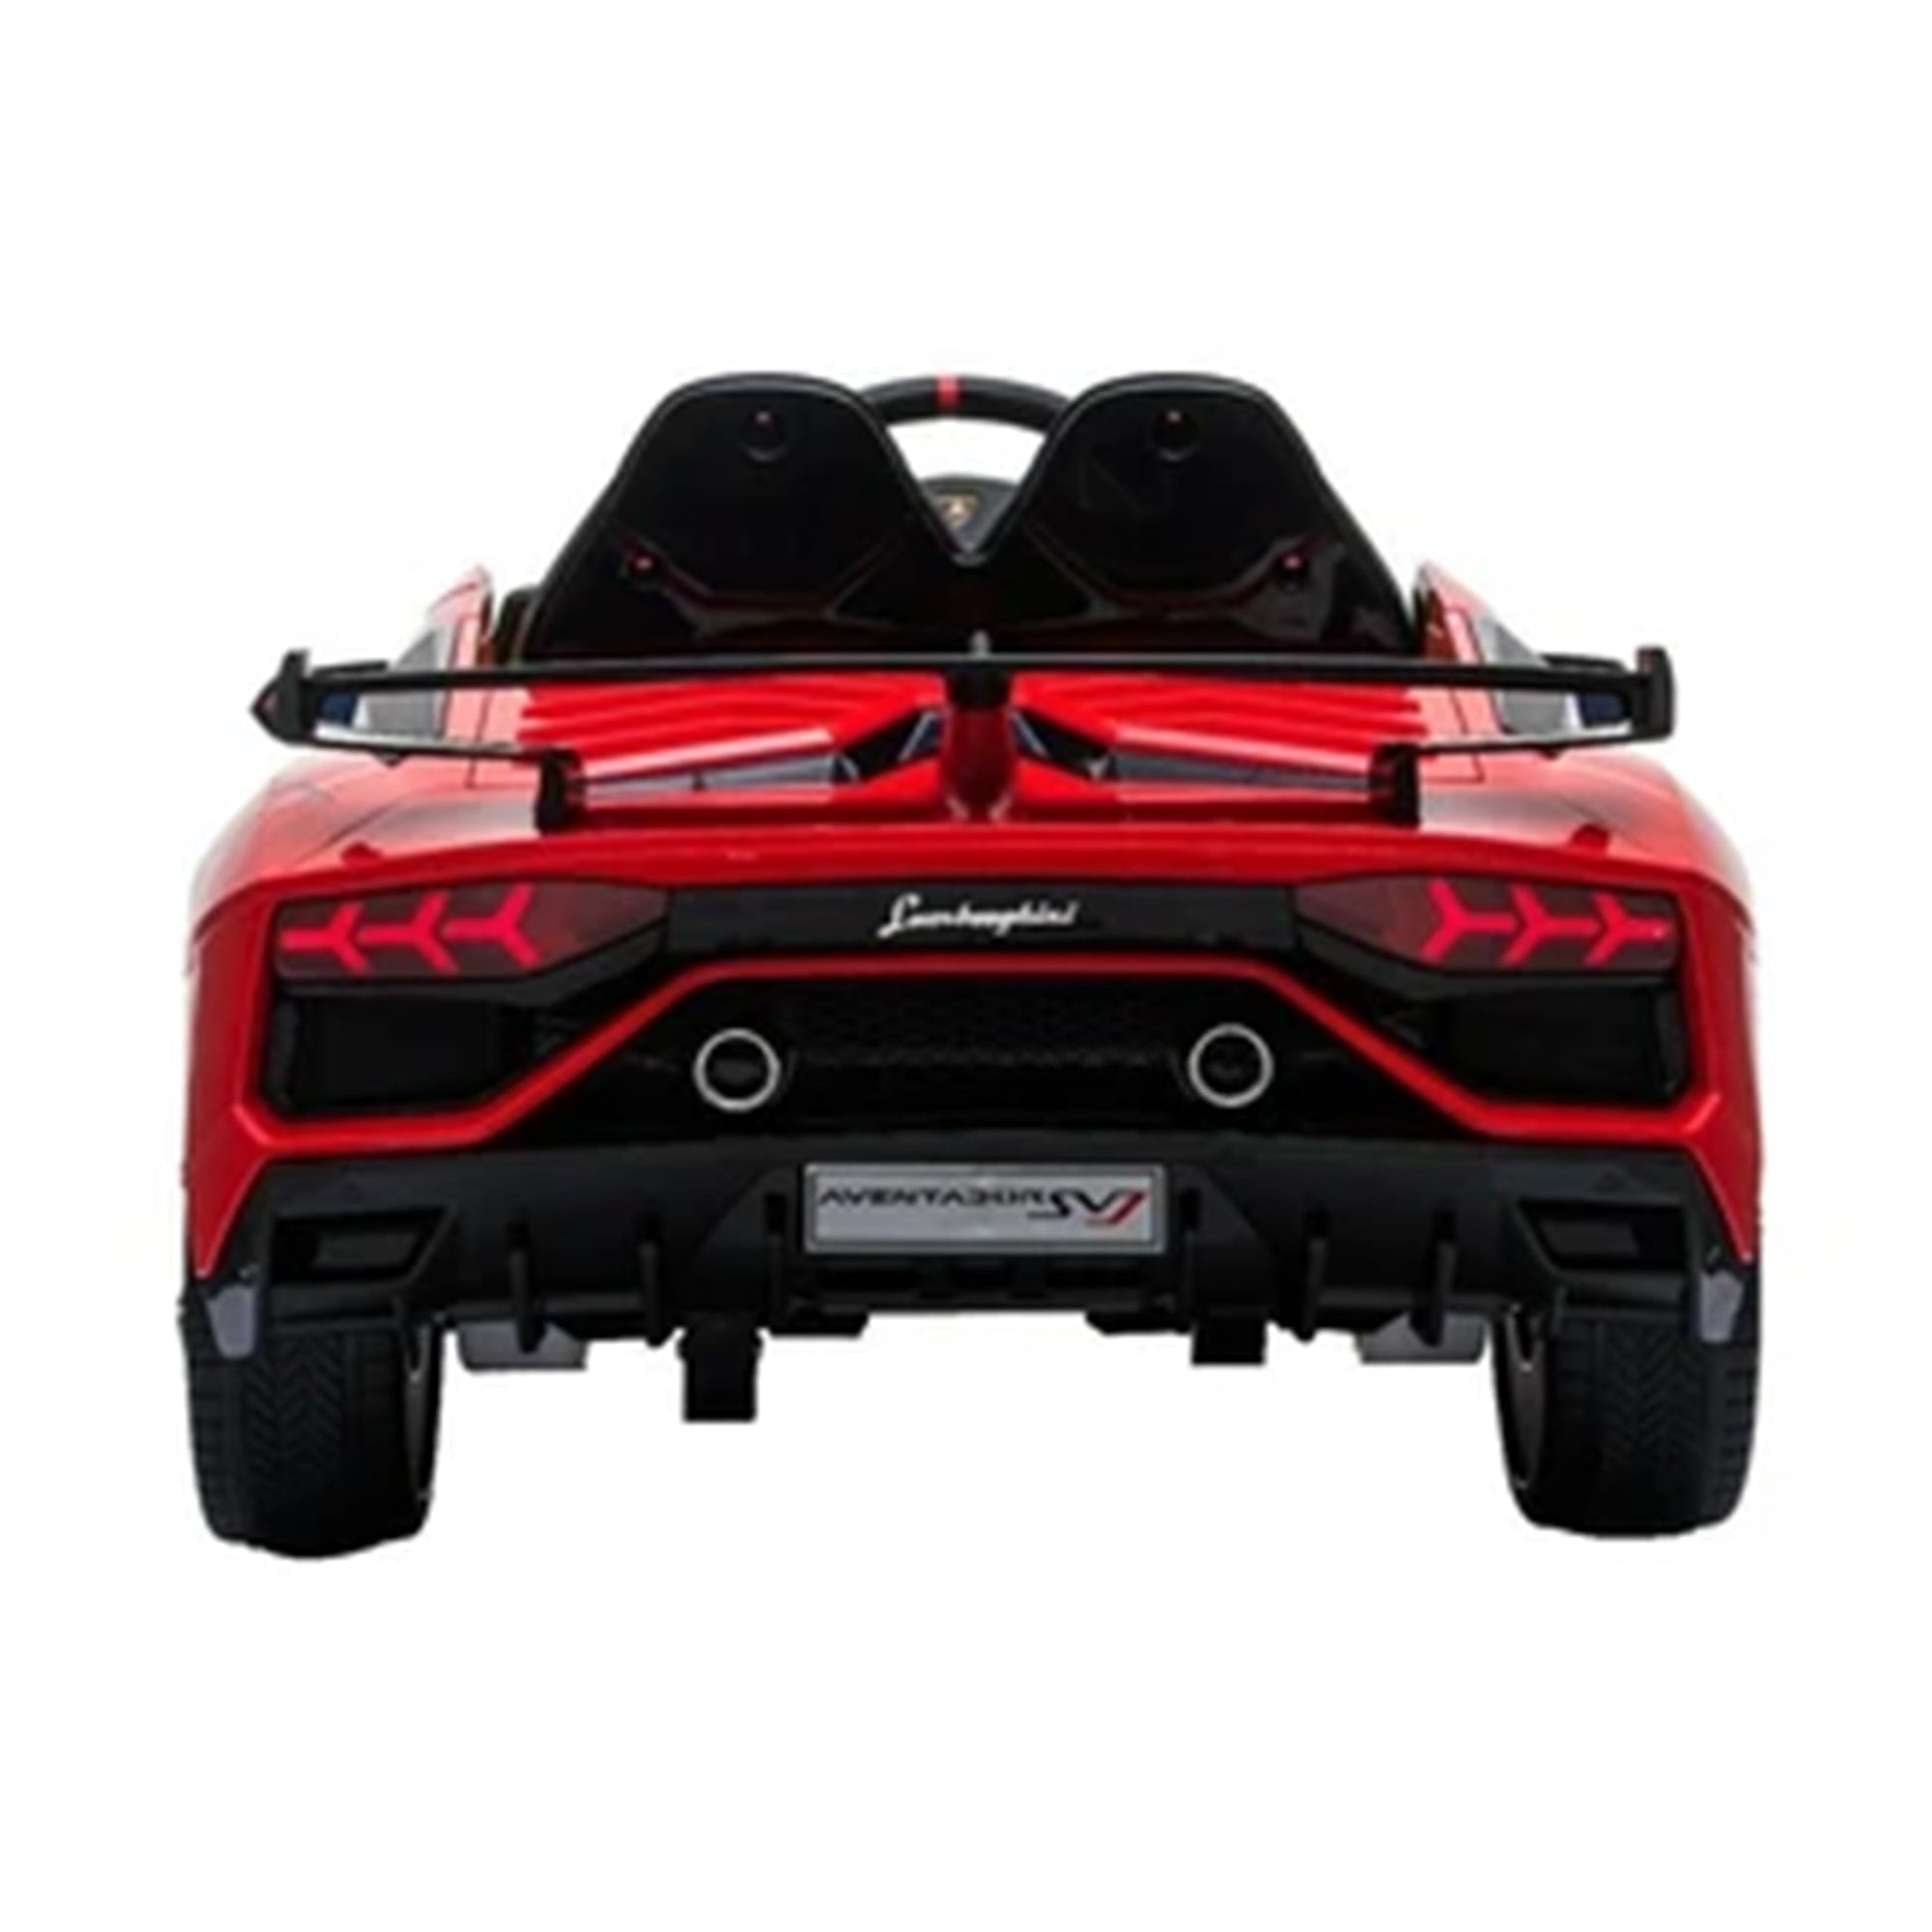 "Rear view of Red Lamborghini SVJ 12V electric ride-on from Kids Car, equipped with rubber EVA tyres and a 2.4G parent remote"